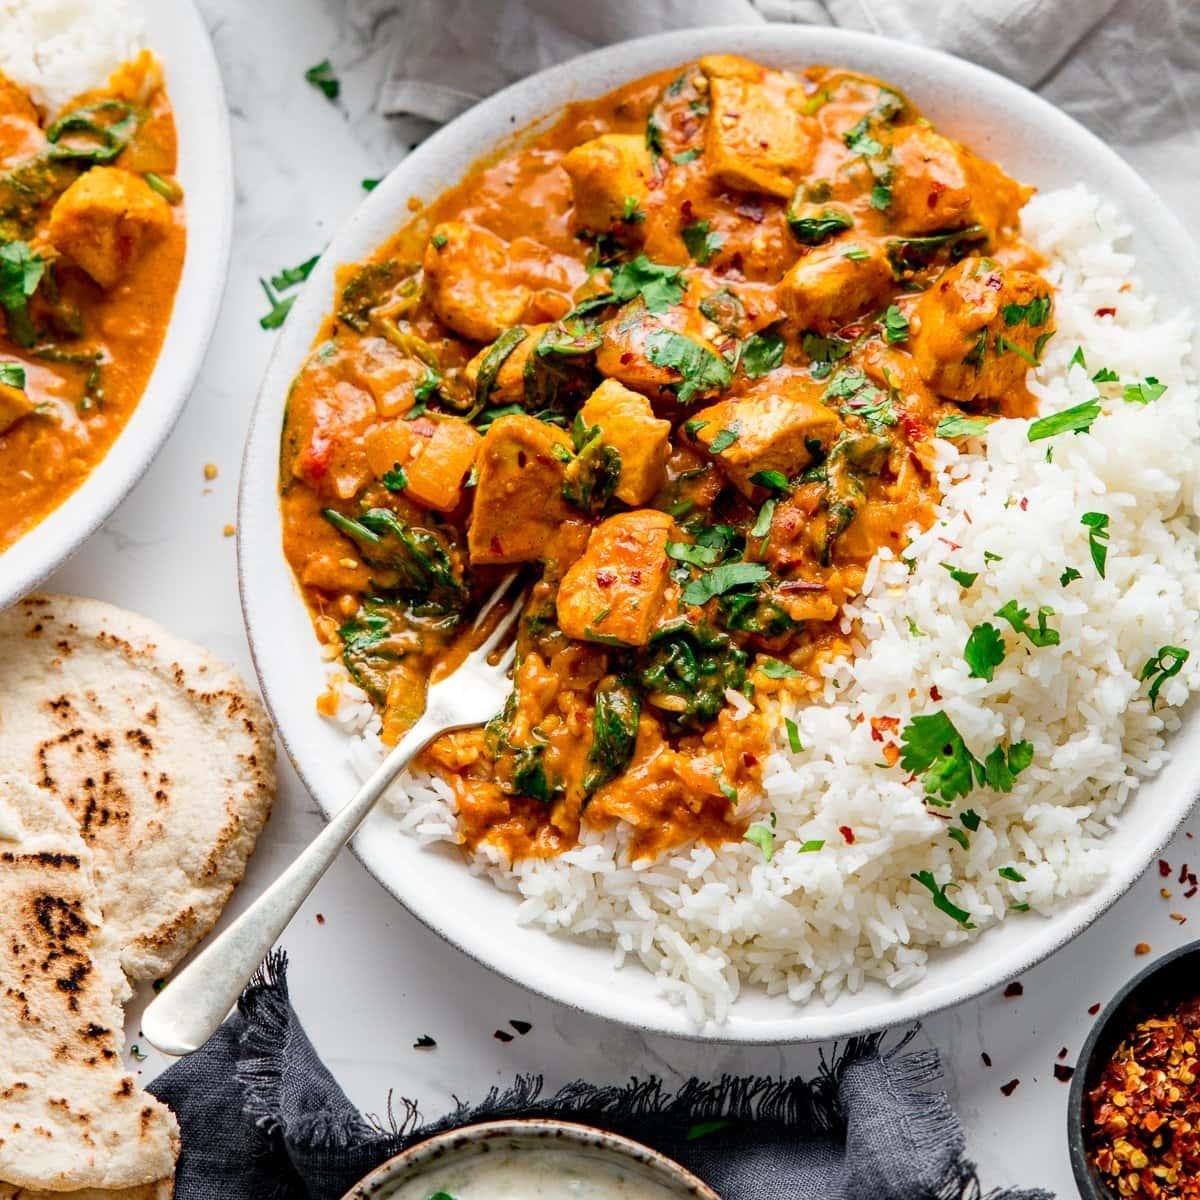 Spice up Your Life: The Ultimate Recipe for Homemade Chicken Curry